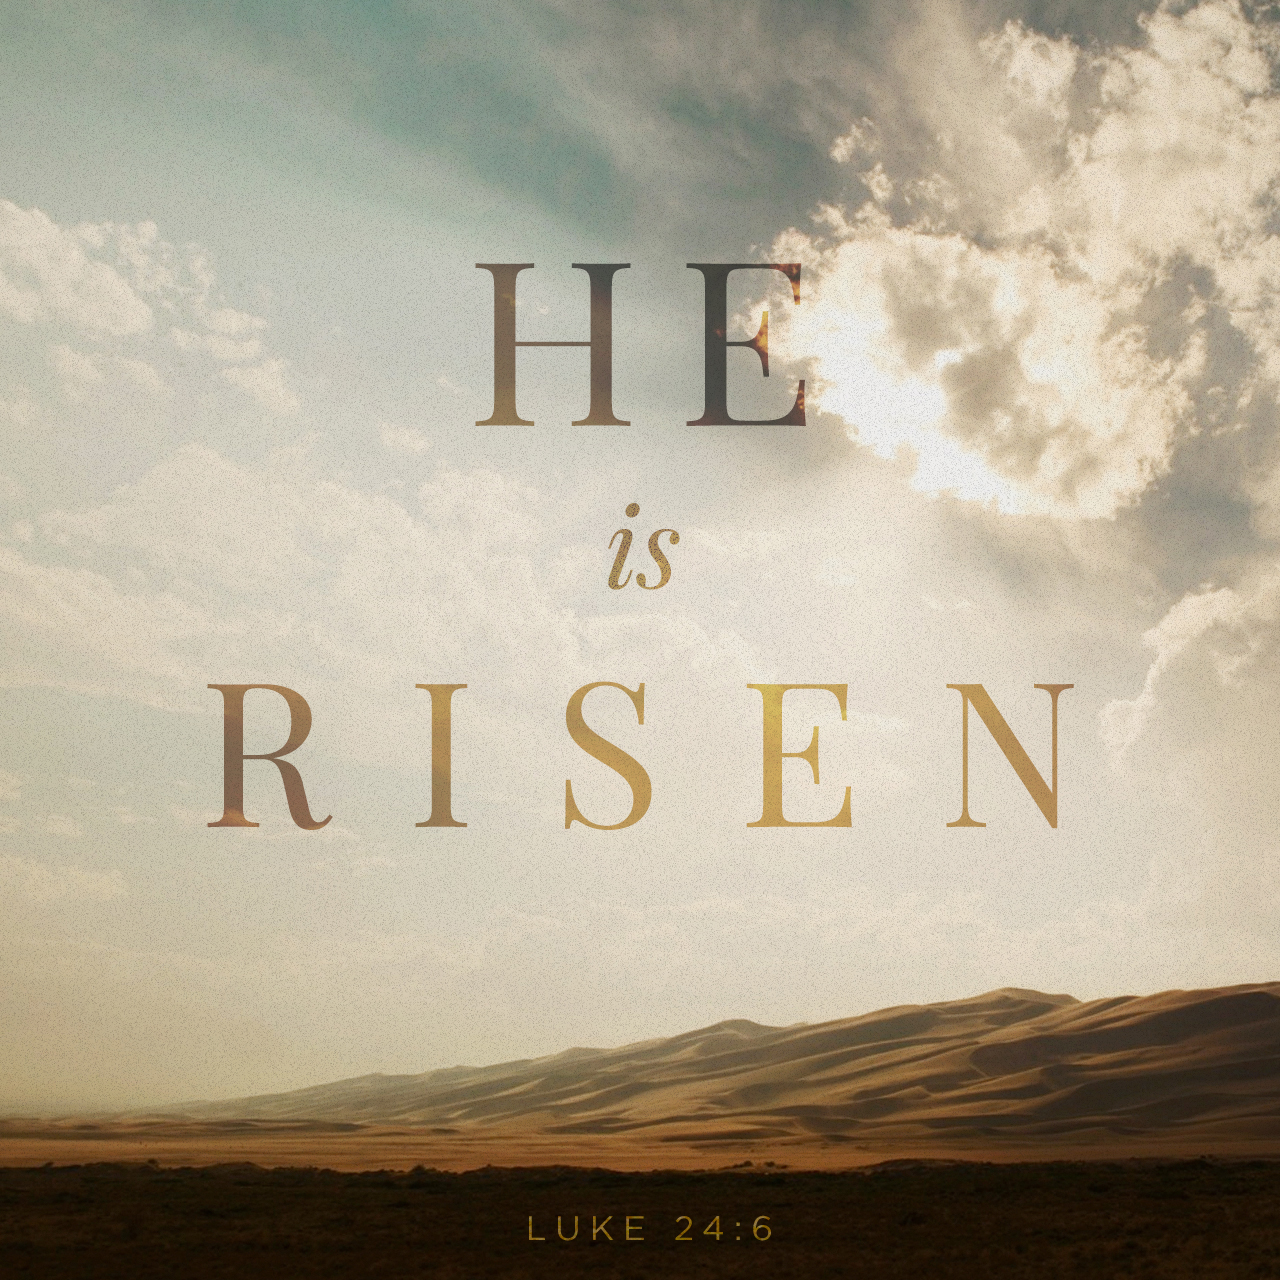 Plan For Reading The Bible: He is risen!